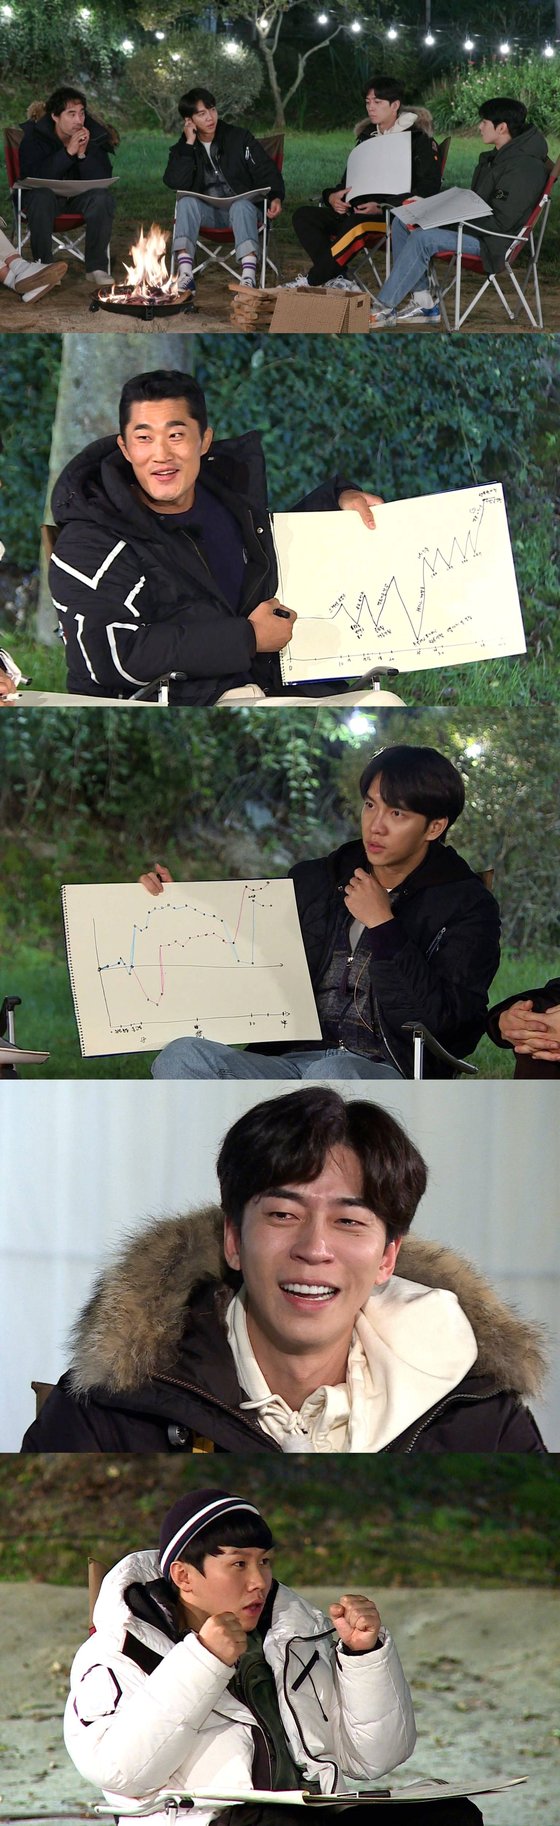 Lee Seung-gis difficult past in SBS entertainment program All The Butlers is contested.In the recent All The Butlers recording, Bae Seong-woo and the members shared their lives by drawing life graphs.They open the graph and openly Confessions about their own life bends.Fighter Kim Dong-Hyun briefly spoke about his days of working part-time jobs, including a PC room and a blocked sewer drill, and Lee Seung-gi said, I never heard my heart in the past. Confessions, telling me the hardest days of my life.In particular, Shin Sung-rok said, Bae Seong-woo, who was looking at his graph, was really hard and full of fighting.I felt such a feeling and I was so cool and envious. (I have lived hard these days) without knowing who I am, he said. I really lived hard, he said. I miss the past, he said.It aired at 6:25 p.m. on the 25th.